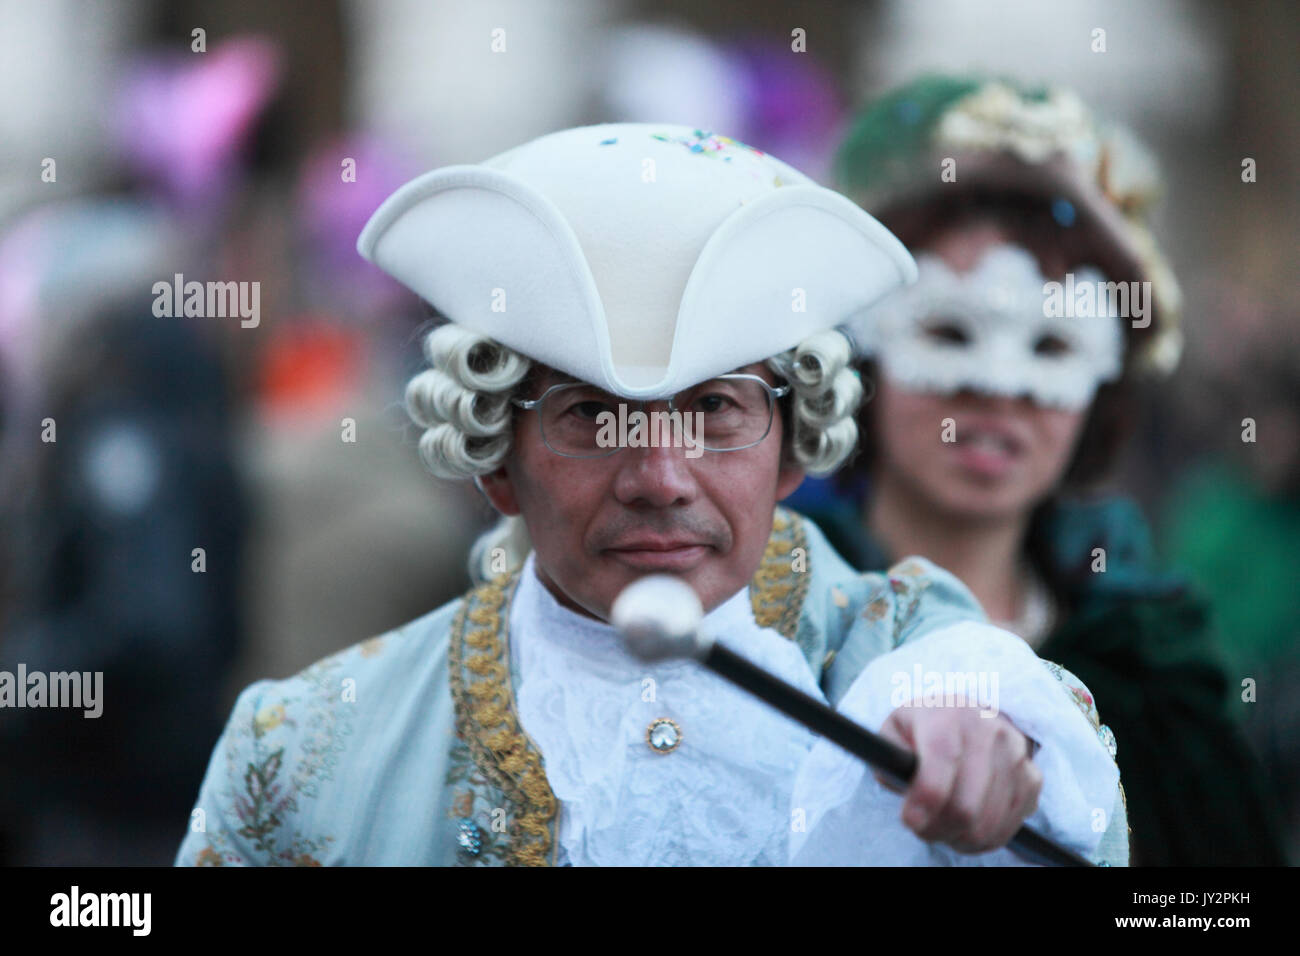 Venice,Italy,February 26th 2011:Image of a man wearing a medieval costume with a stick in an agressive position during the Carnival of Venice nights.T Stock Photo